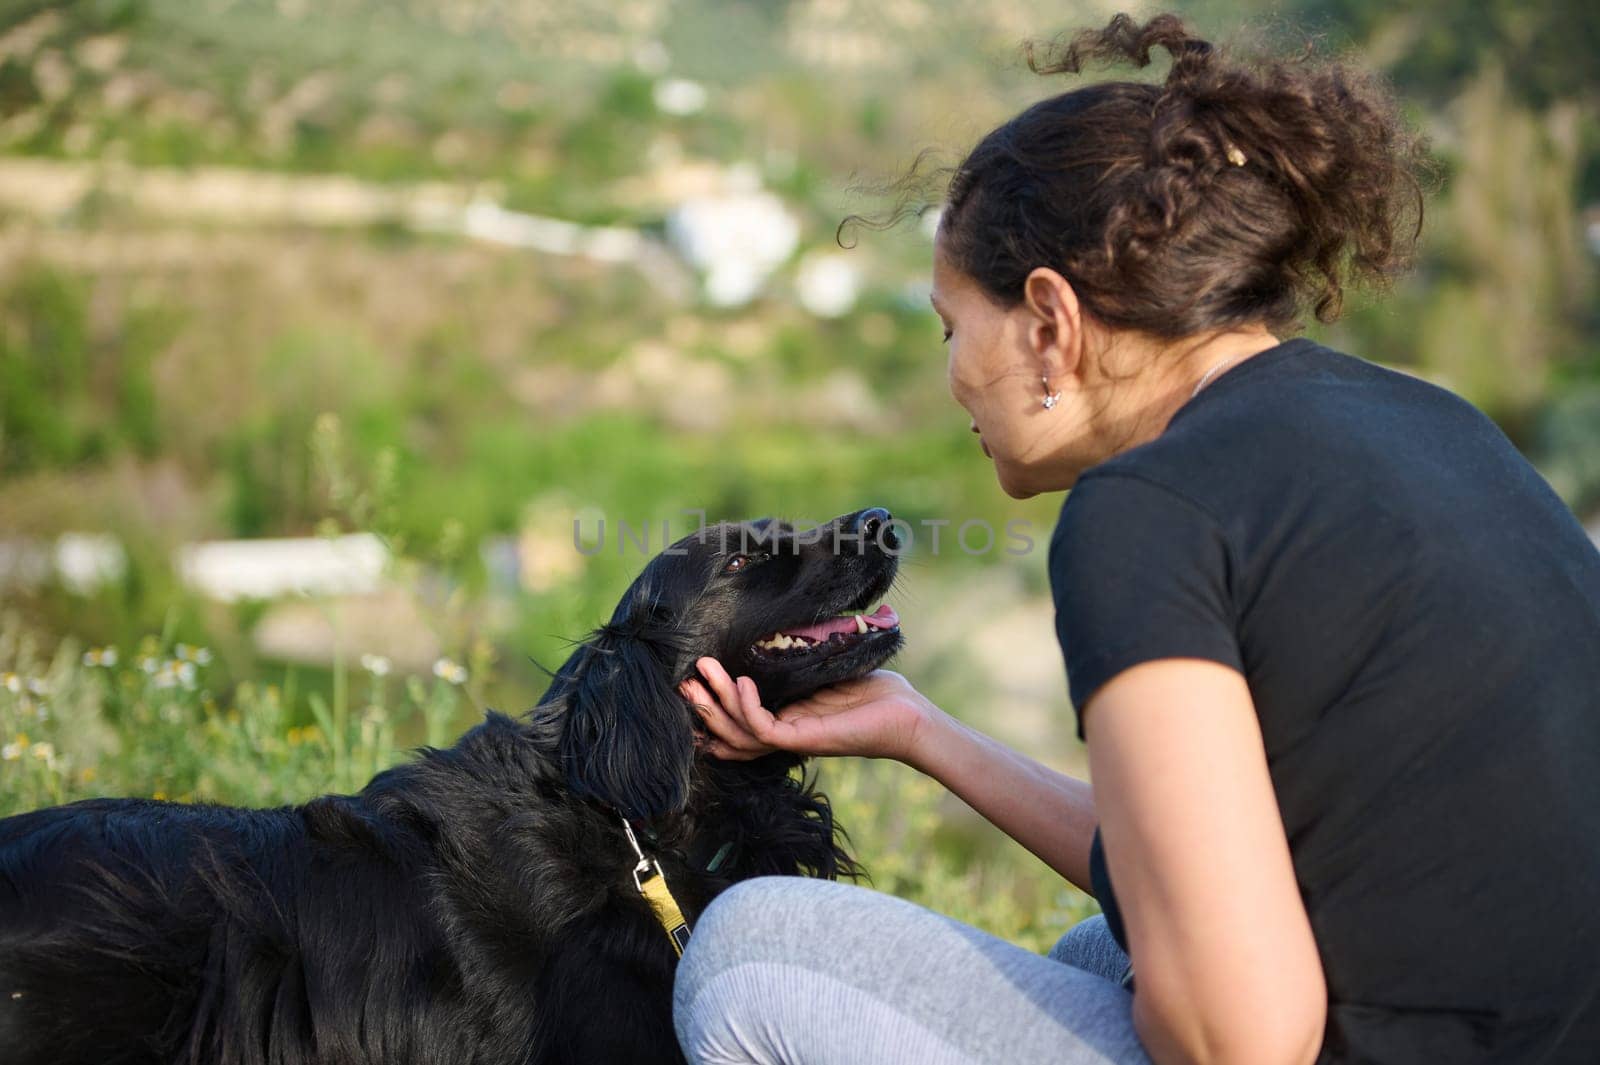 Authentic portrait of an affectionate young woman embracing pet dog in the nature. Happy female enjoying spending time with her cocker spaniel outdoors